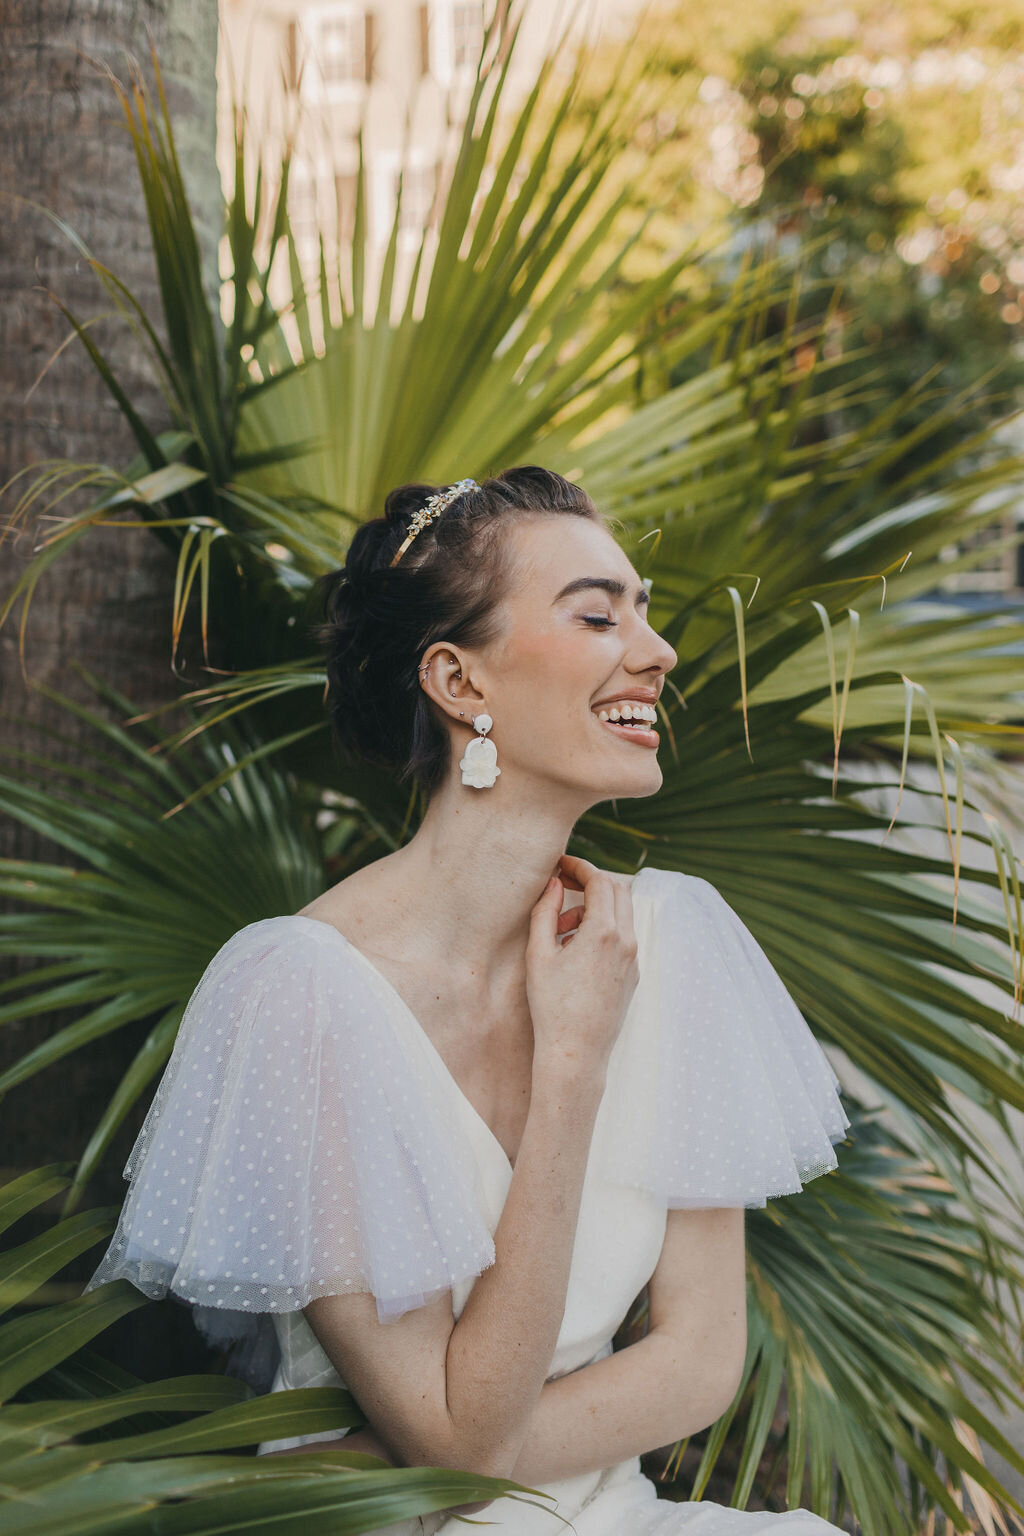 The swiss dot net flutter sleeves of the Mai wedding dress style pop against the green of the palmettos in downtown Charleston.